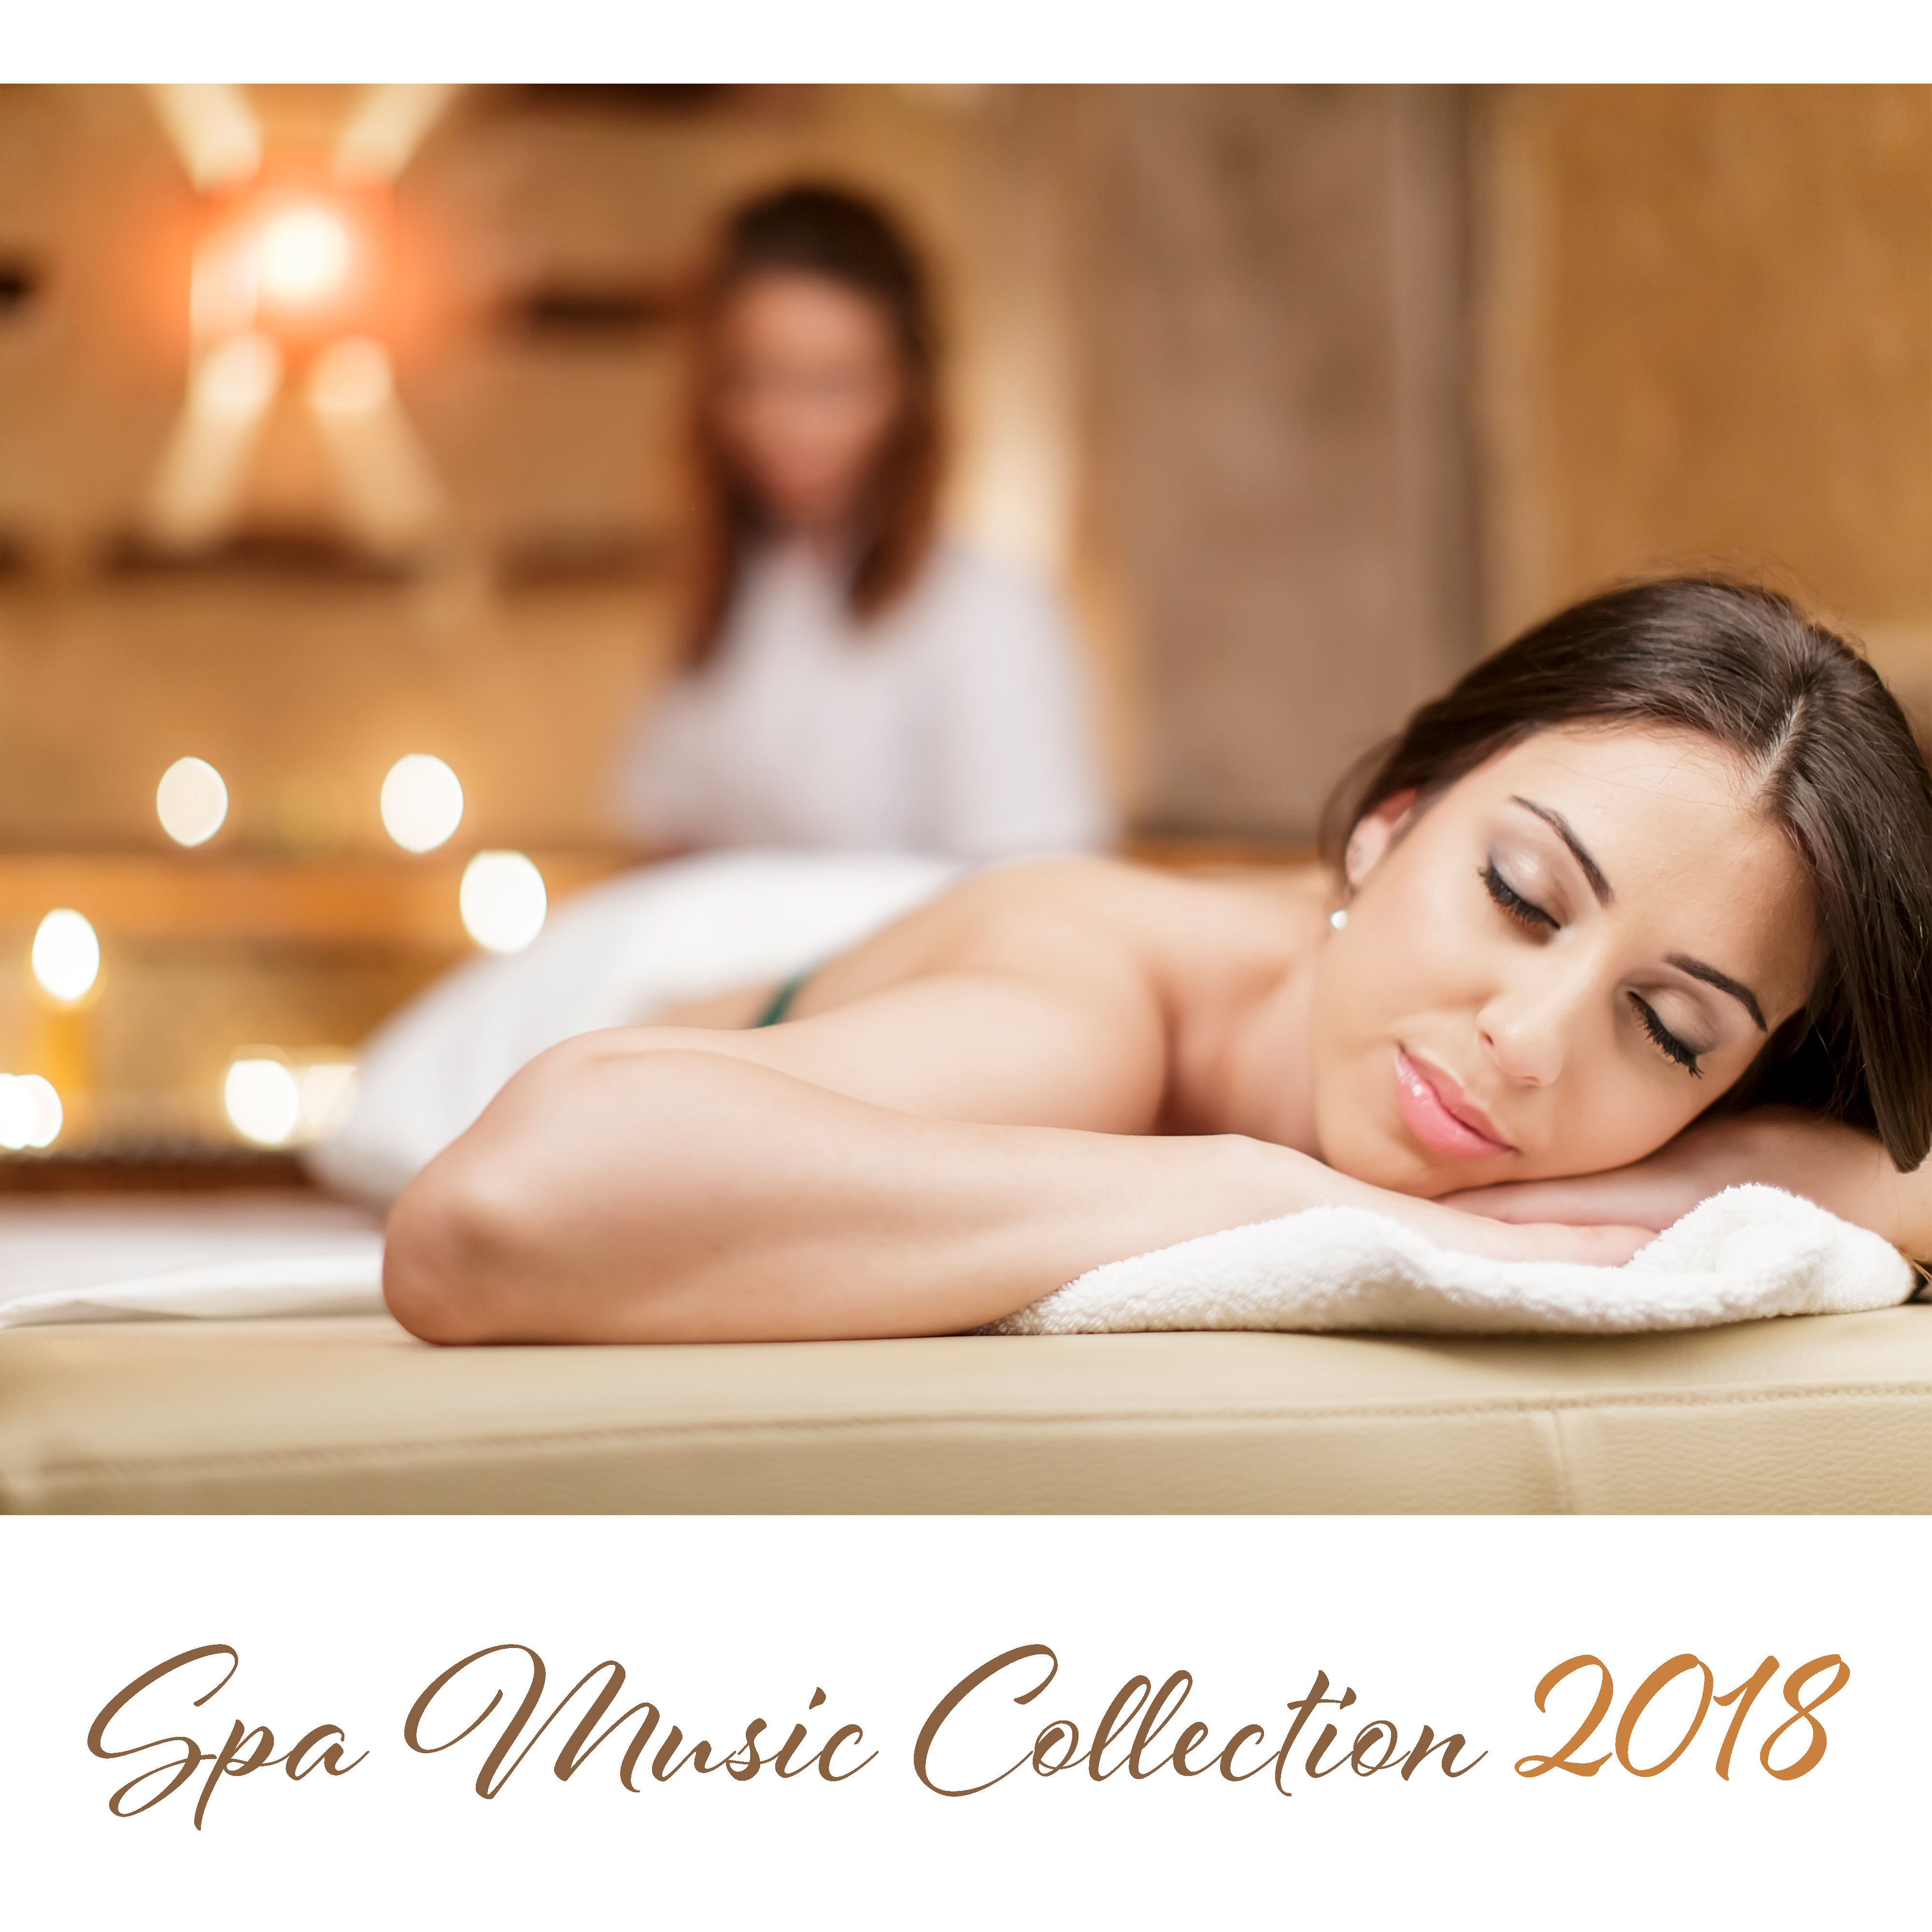 Spa Music Collection 2018